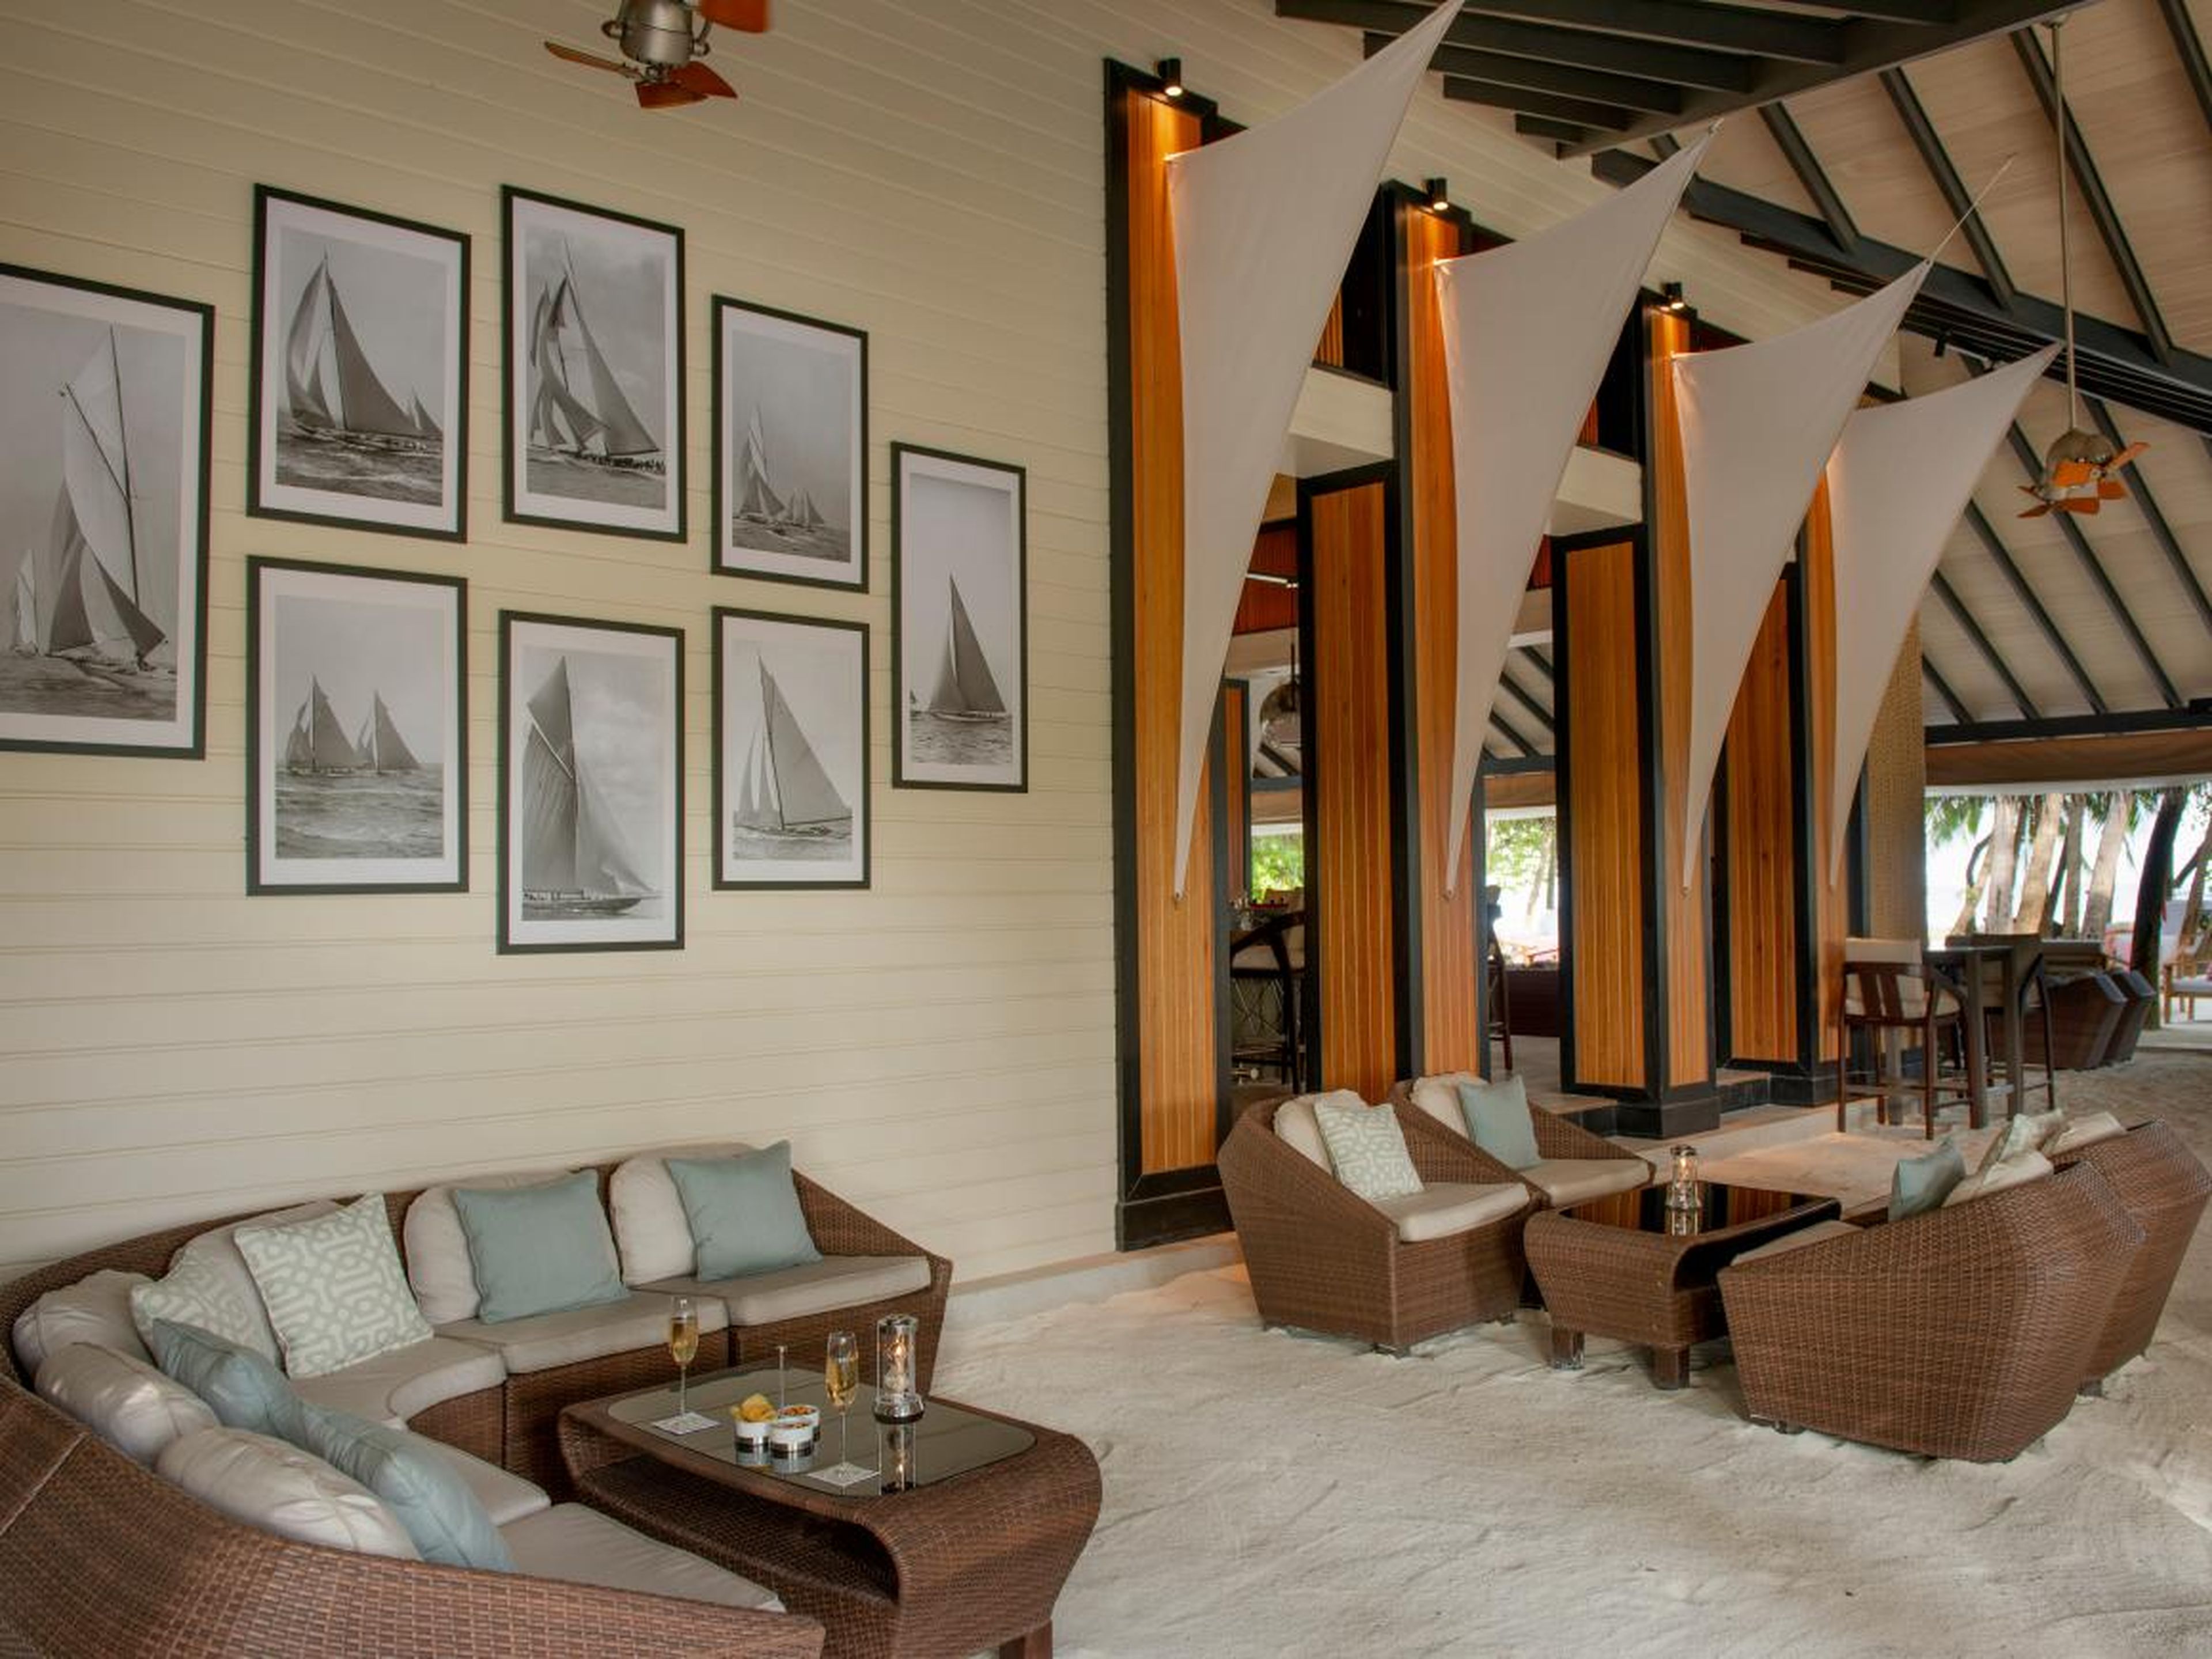 Its lounge area blurs the line between beach and bar.